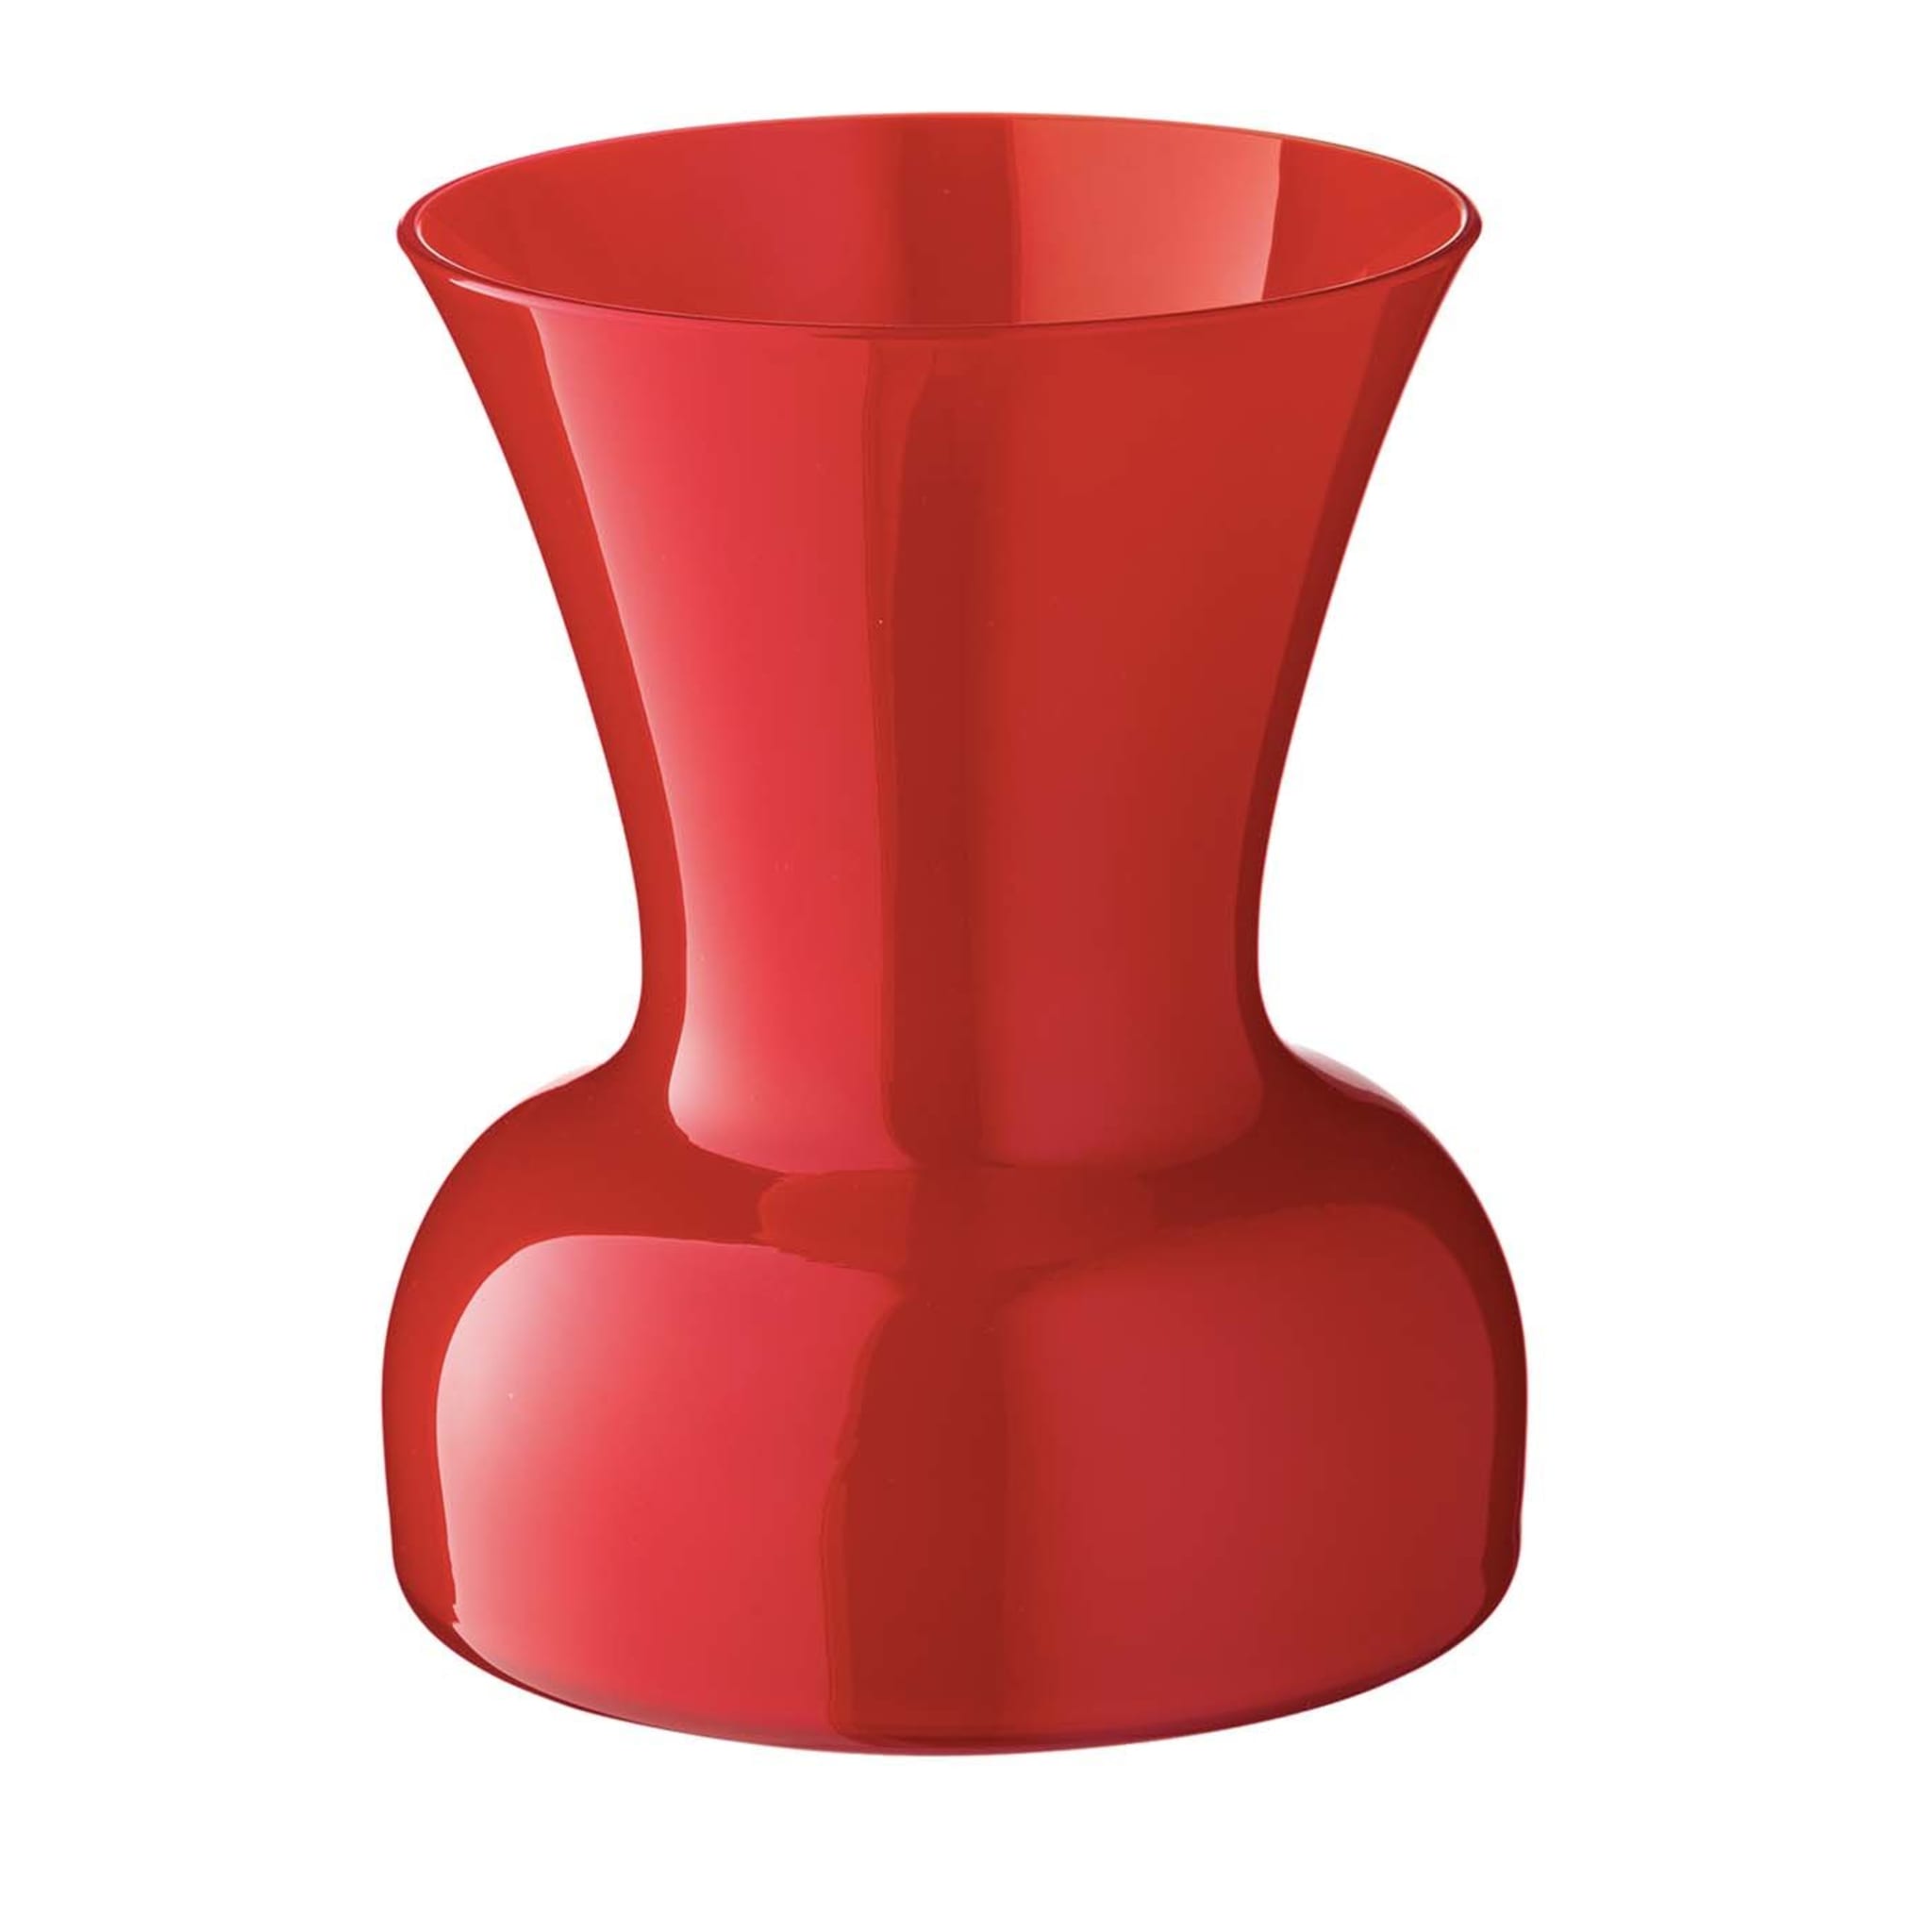 Profili Small Lily Vase in Red Glass by Anna Gili - Main view